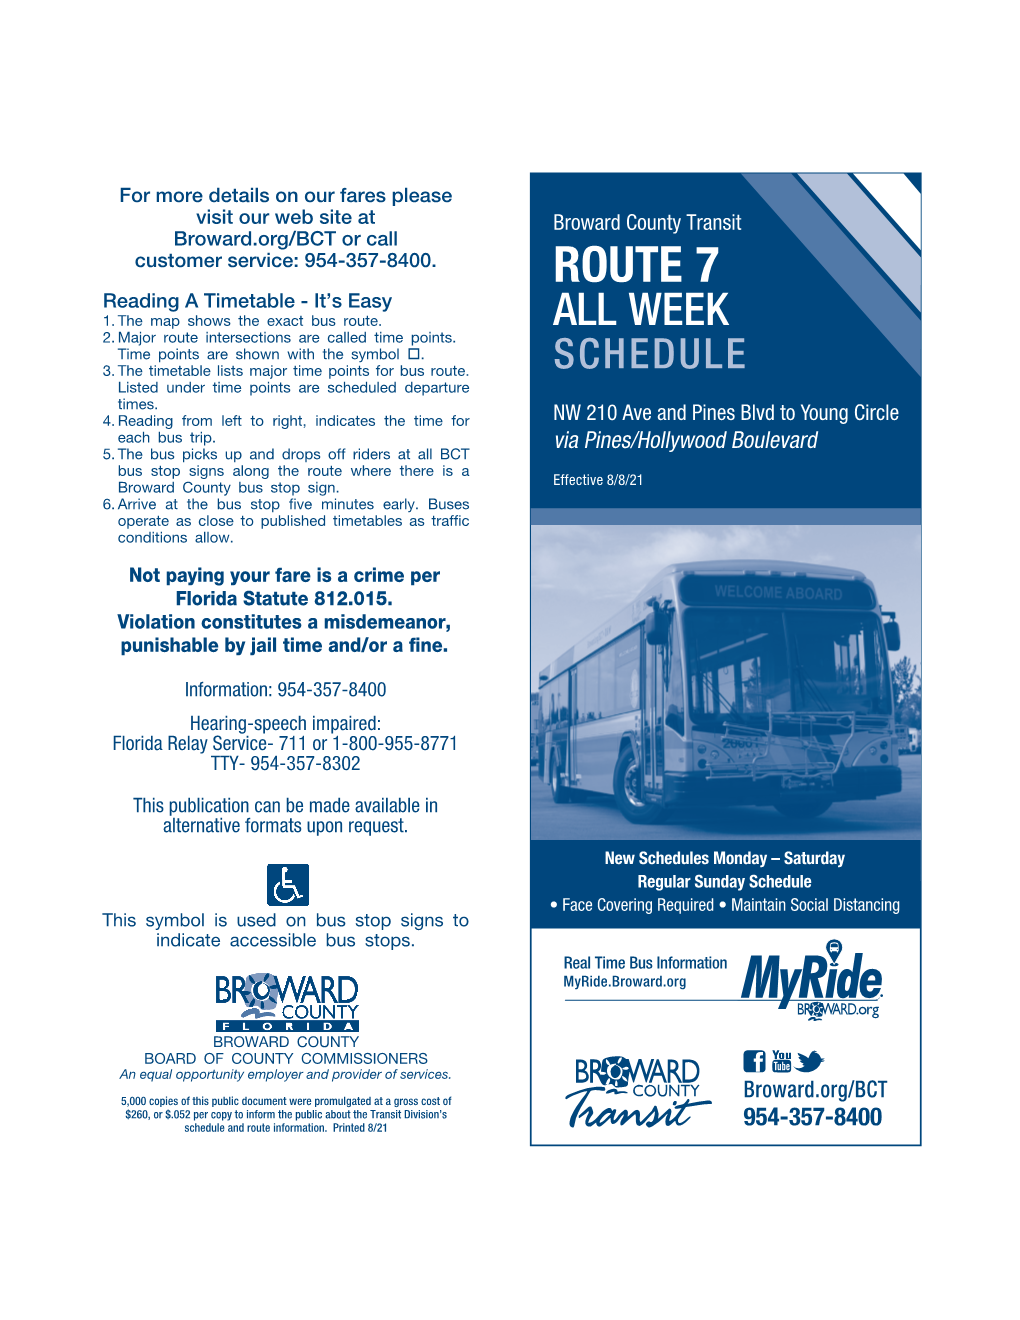 Route 7 Timetable